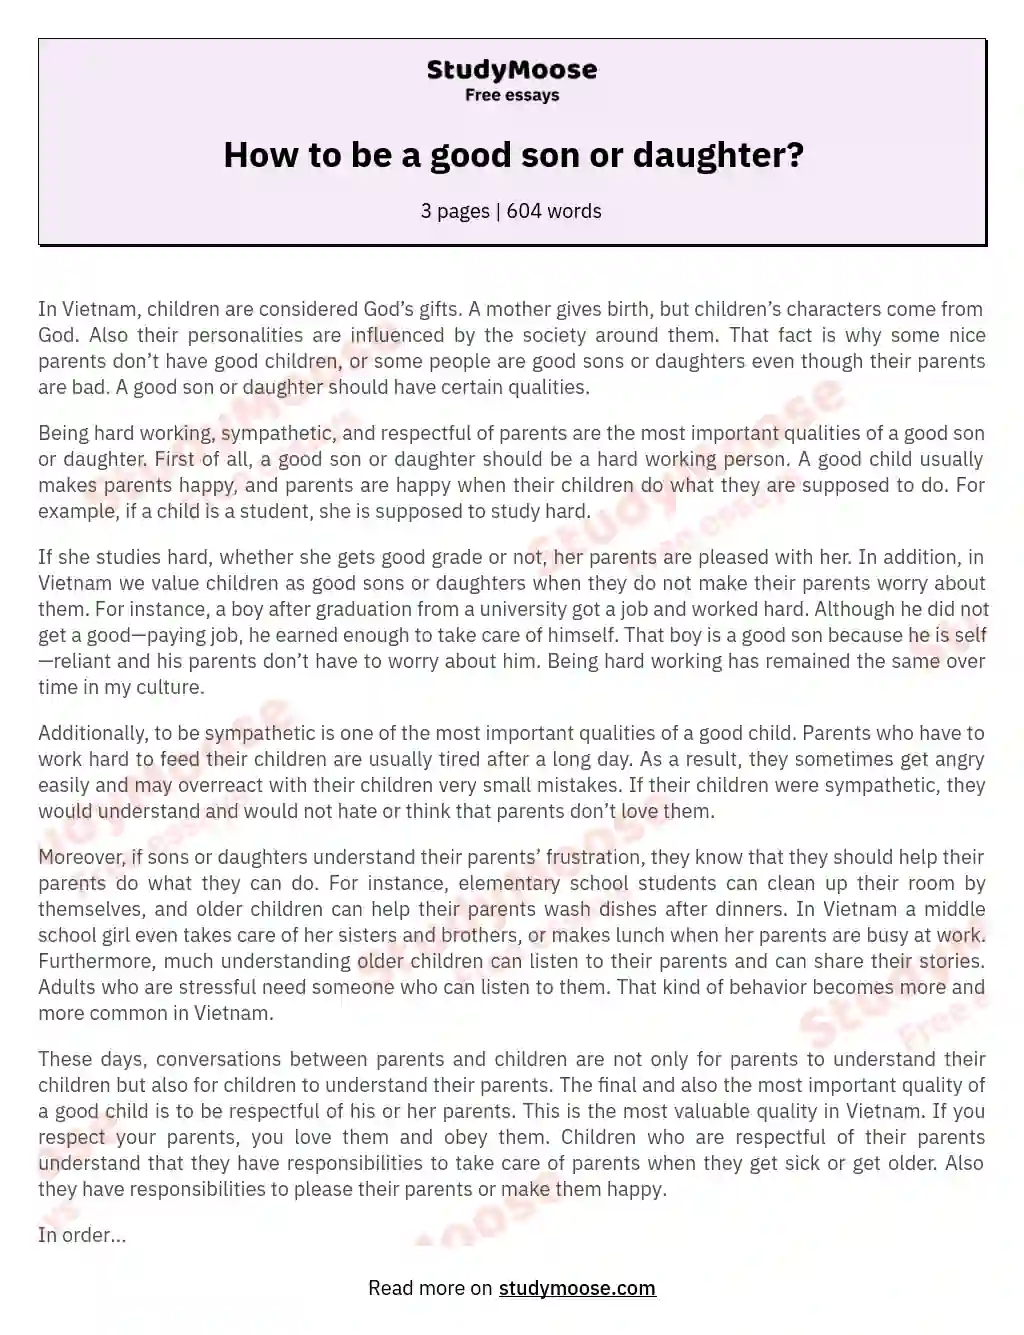 How to be a good son or daughter? essay